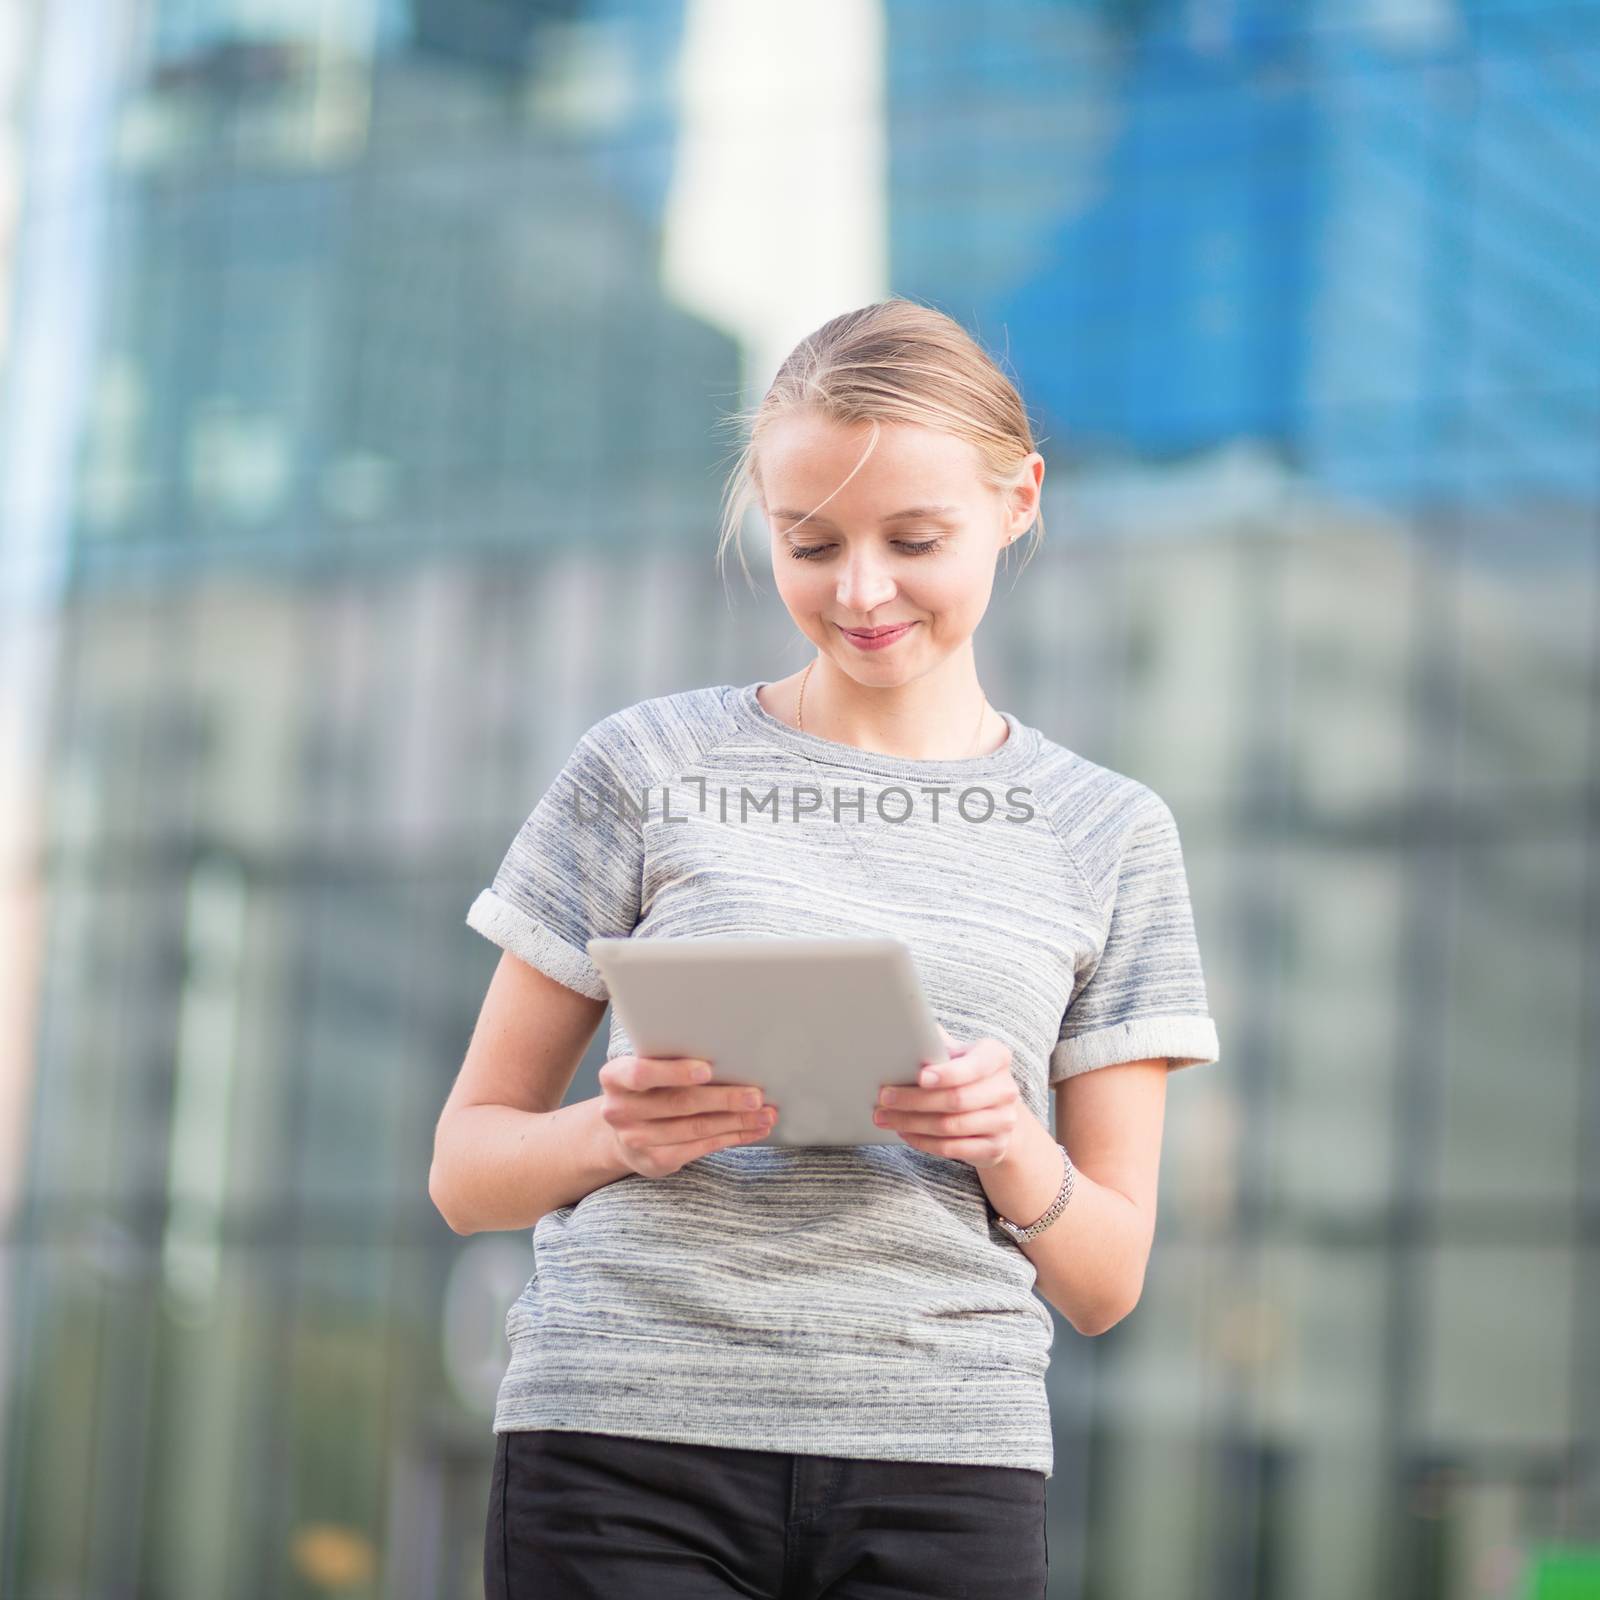 Young woman in office interior using tablet by jaspe